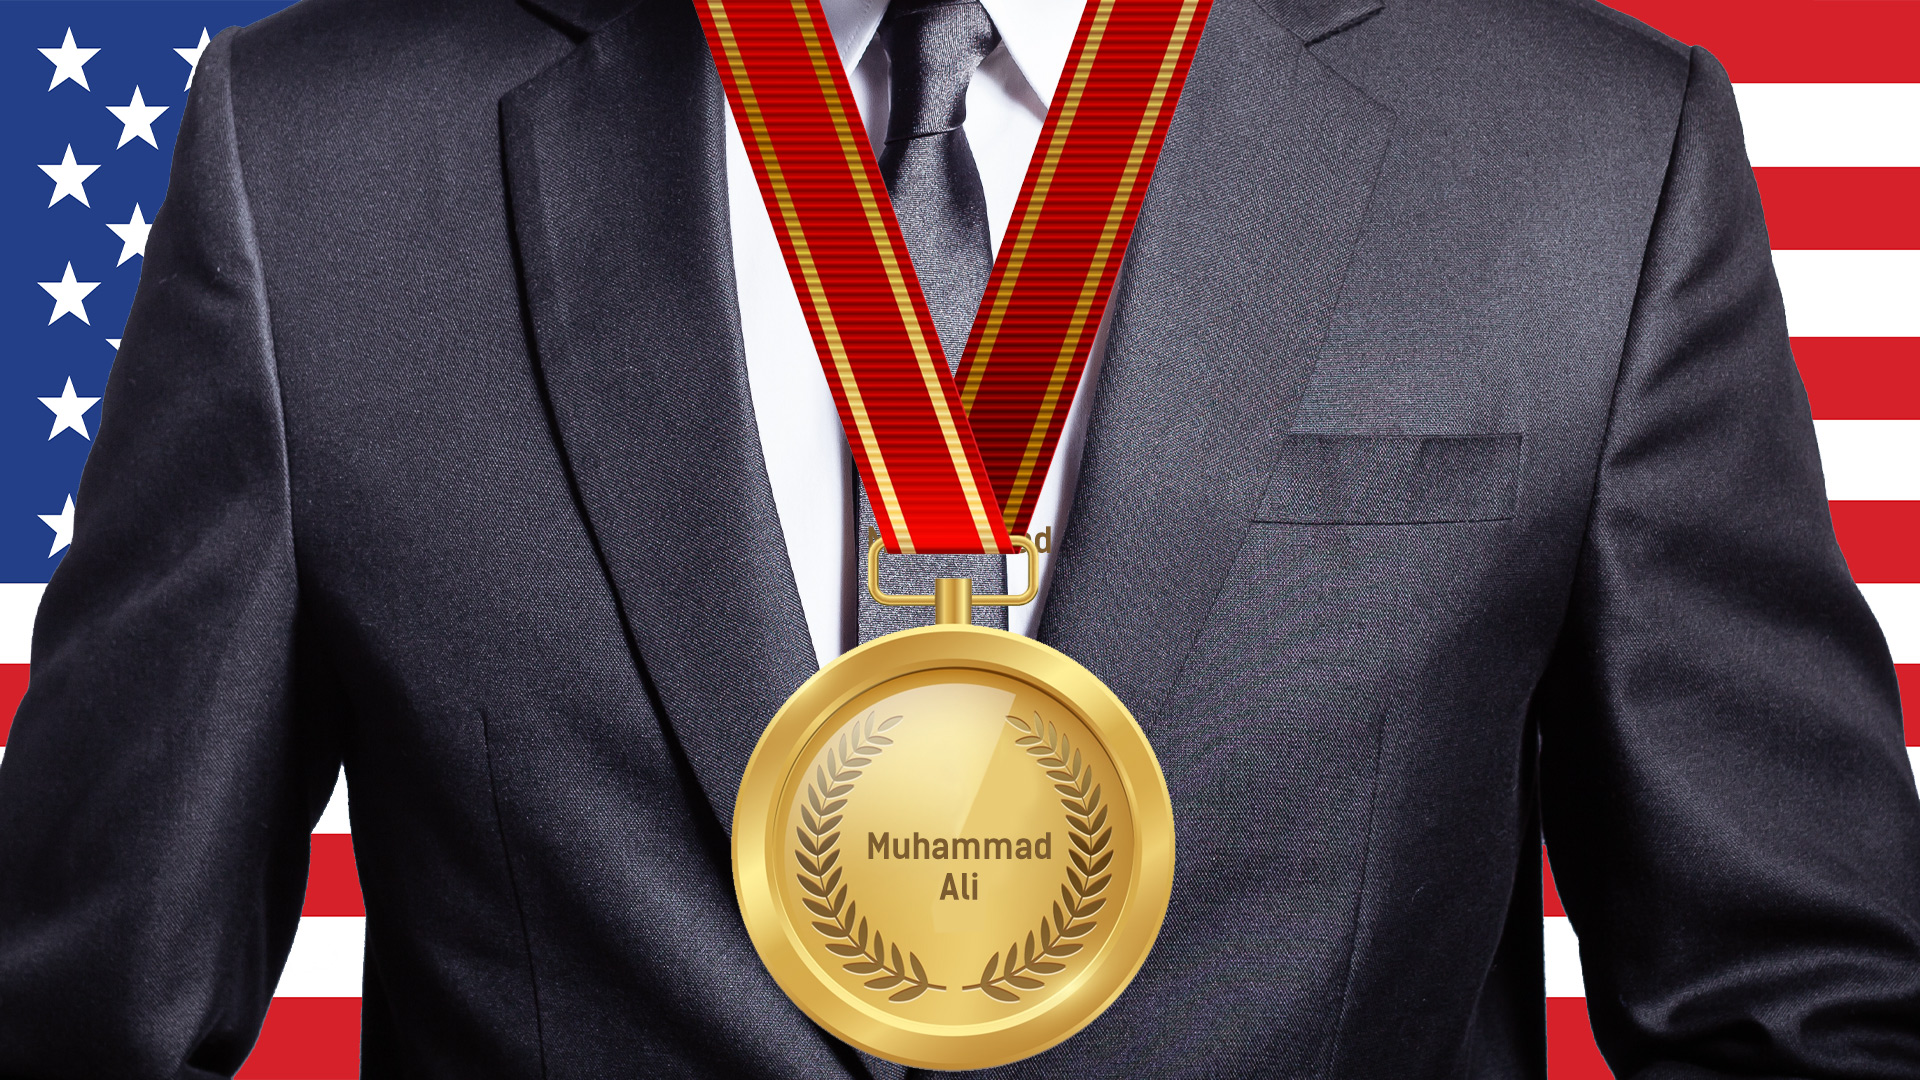 A gold medal featuring the name of Muhammad Ali